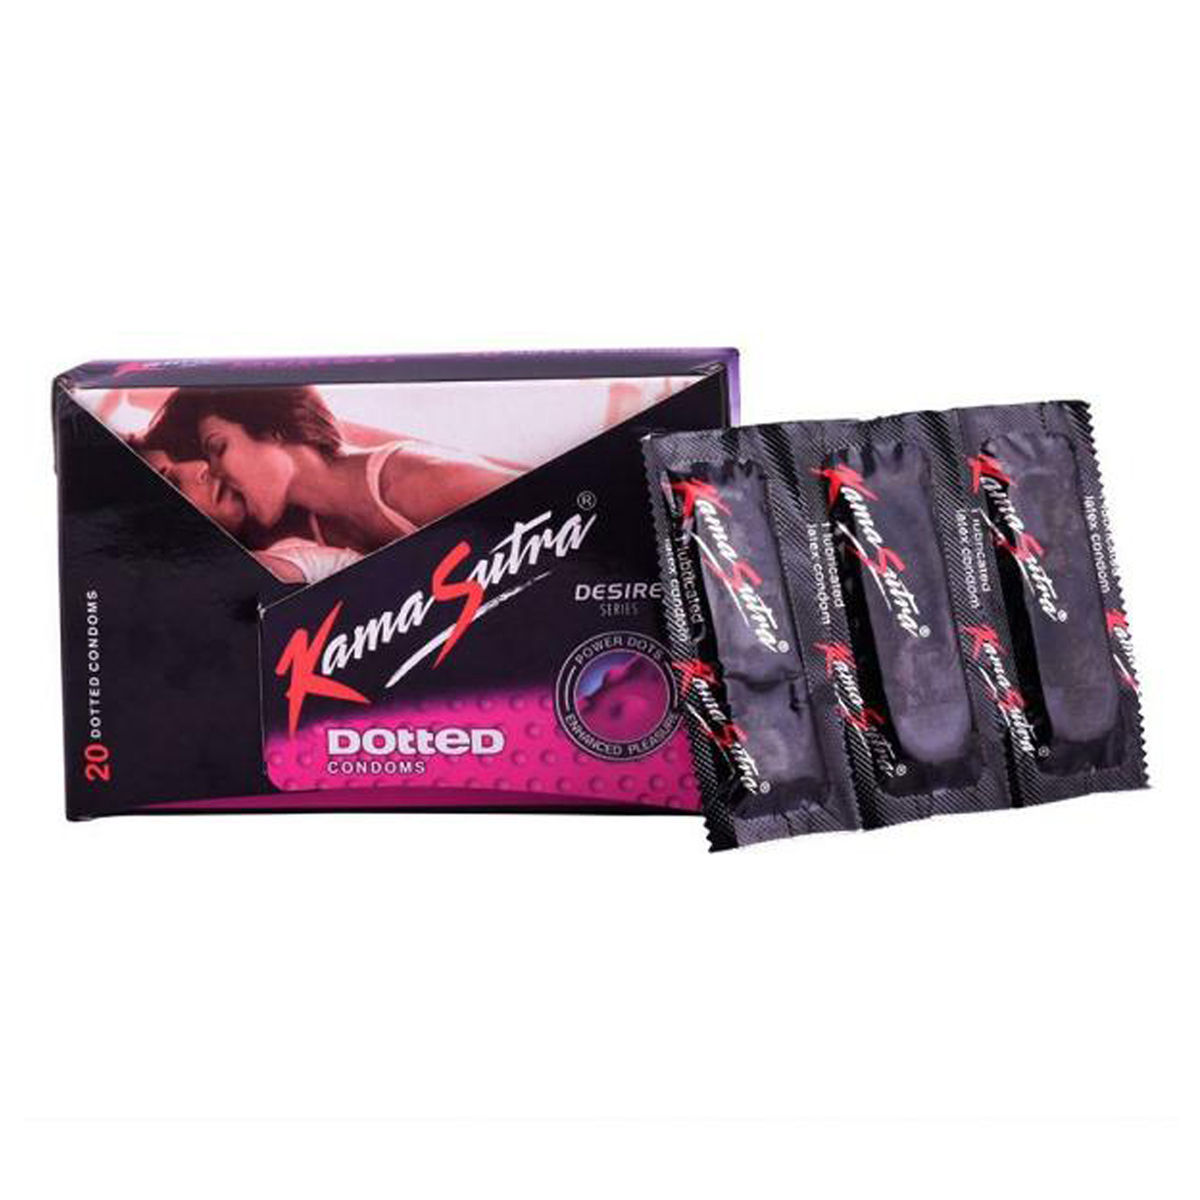 Buy Kamasutra Dotted Condoms, 20 Count Online